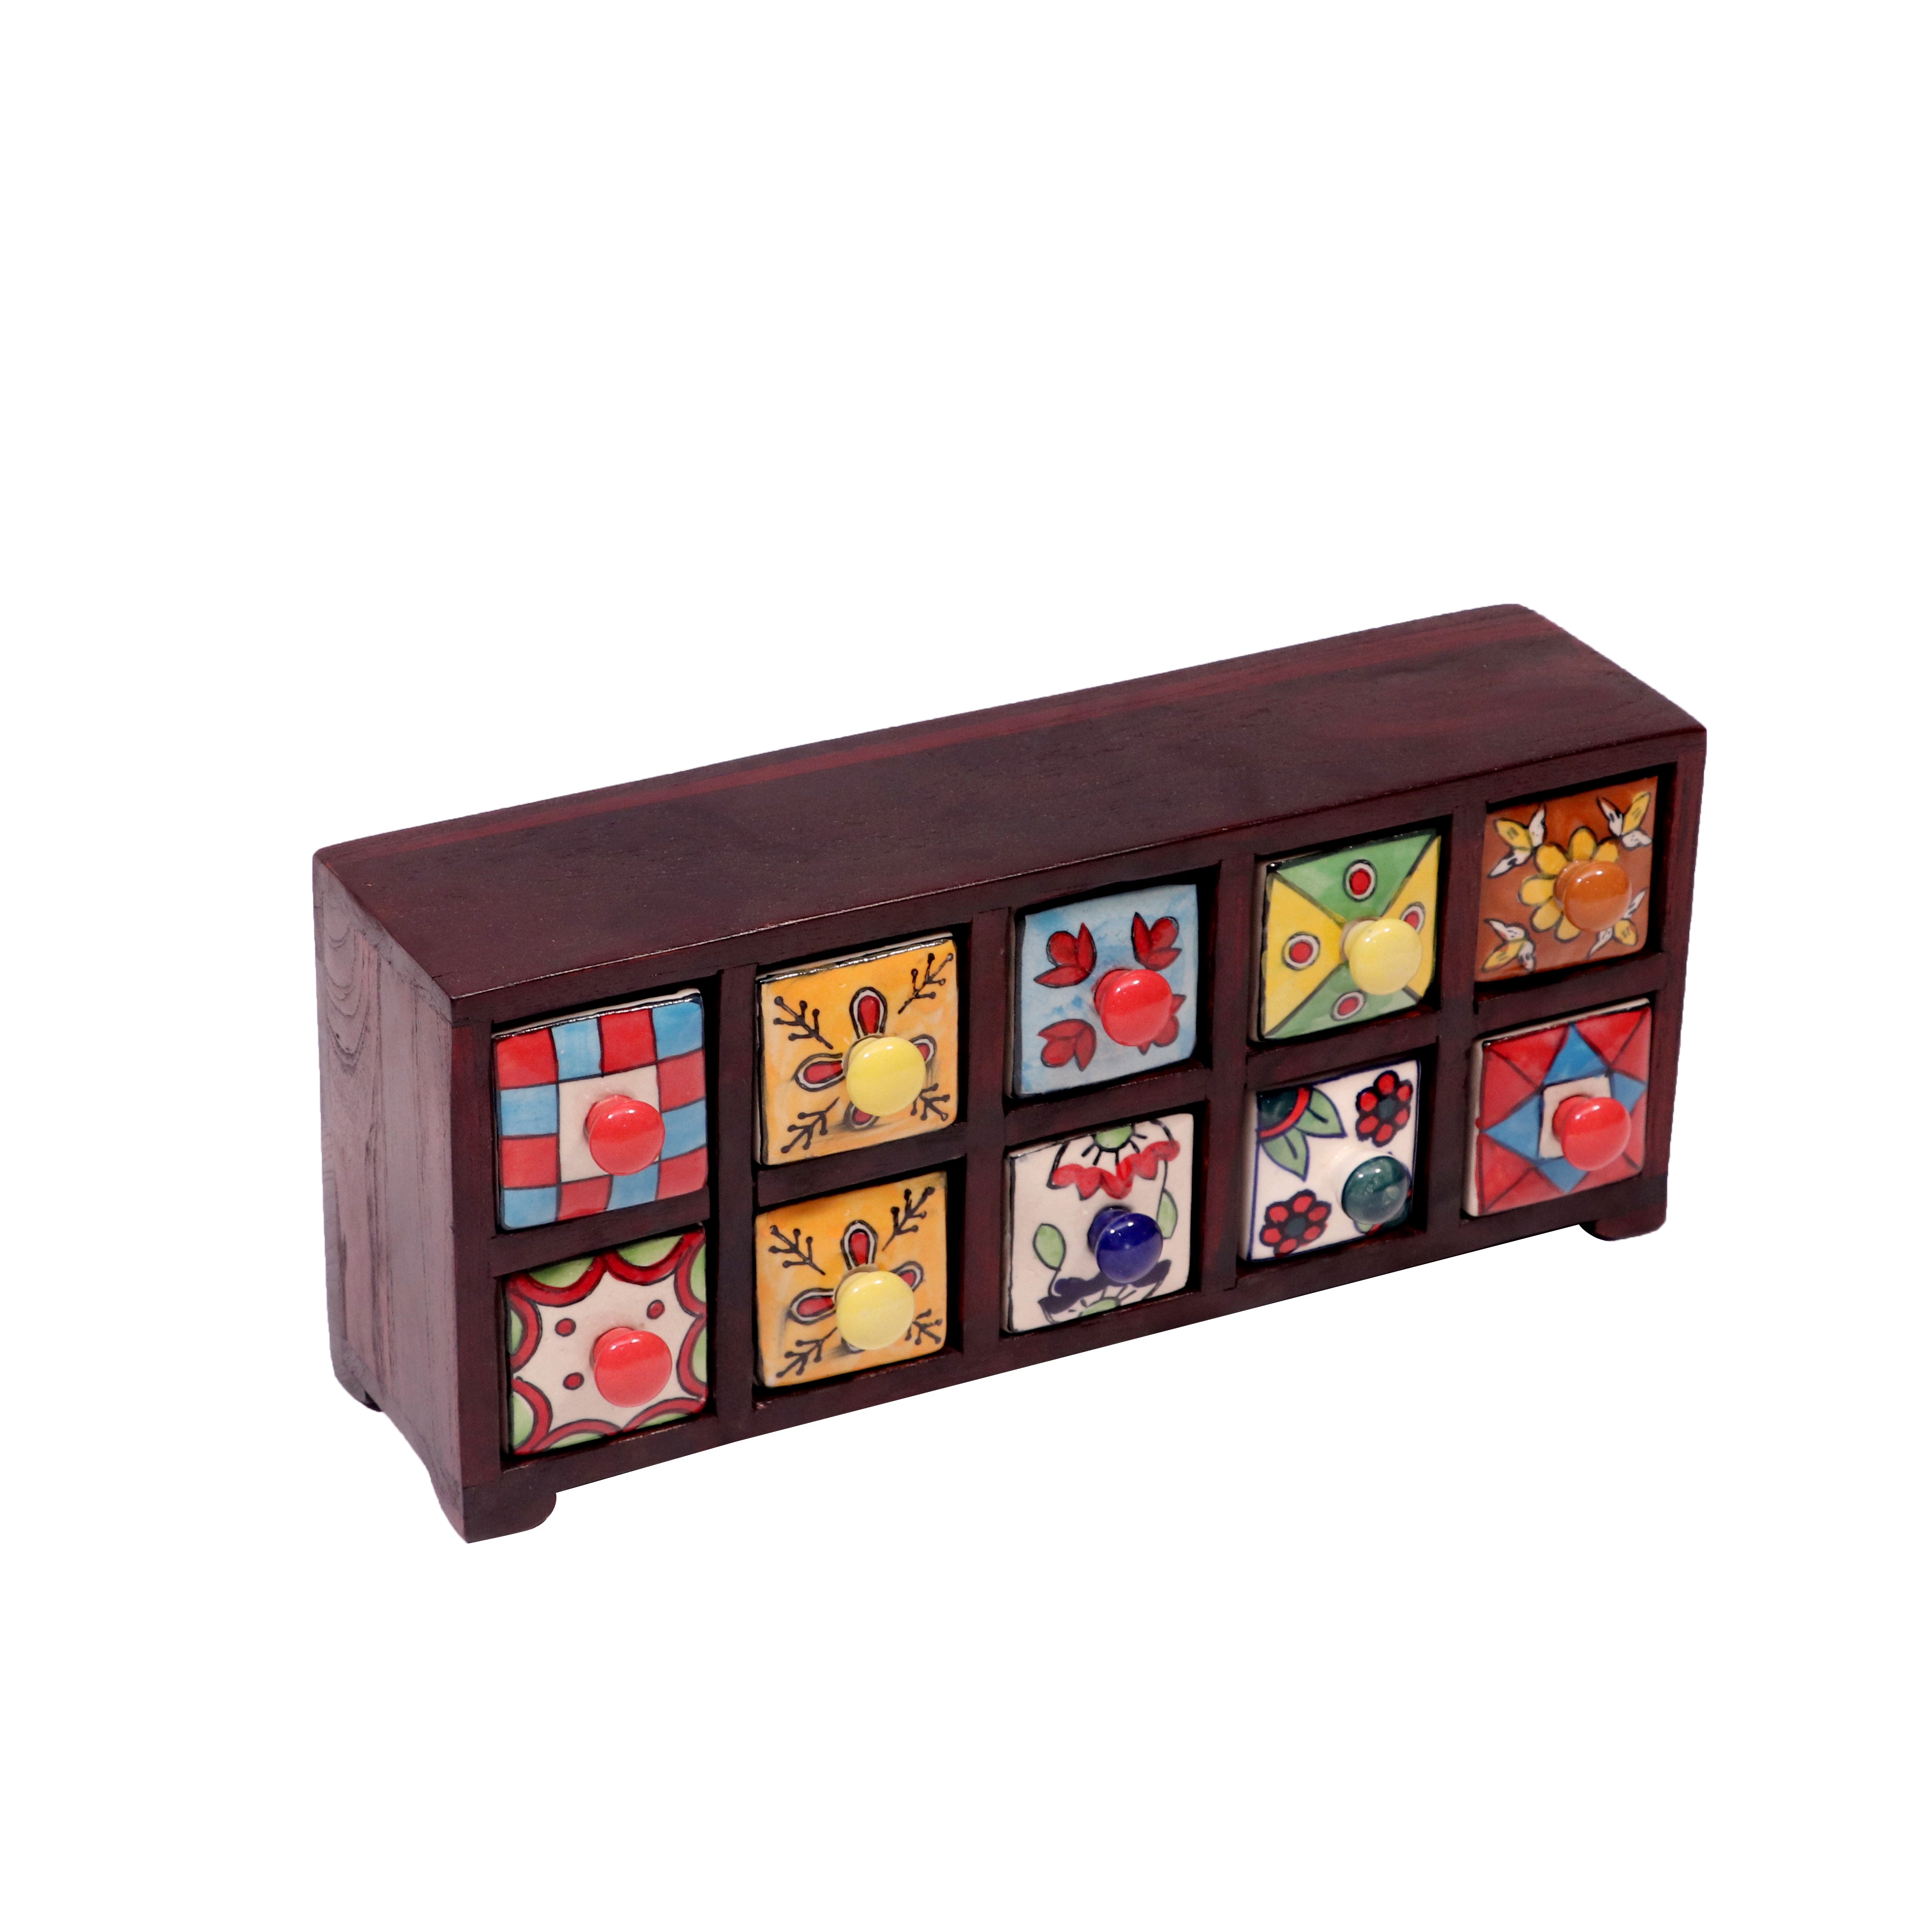 10 drawers double row ceramic miniature chest -(Mahogany Touch) Desk Organizer